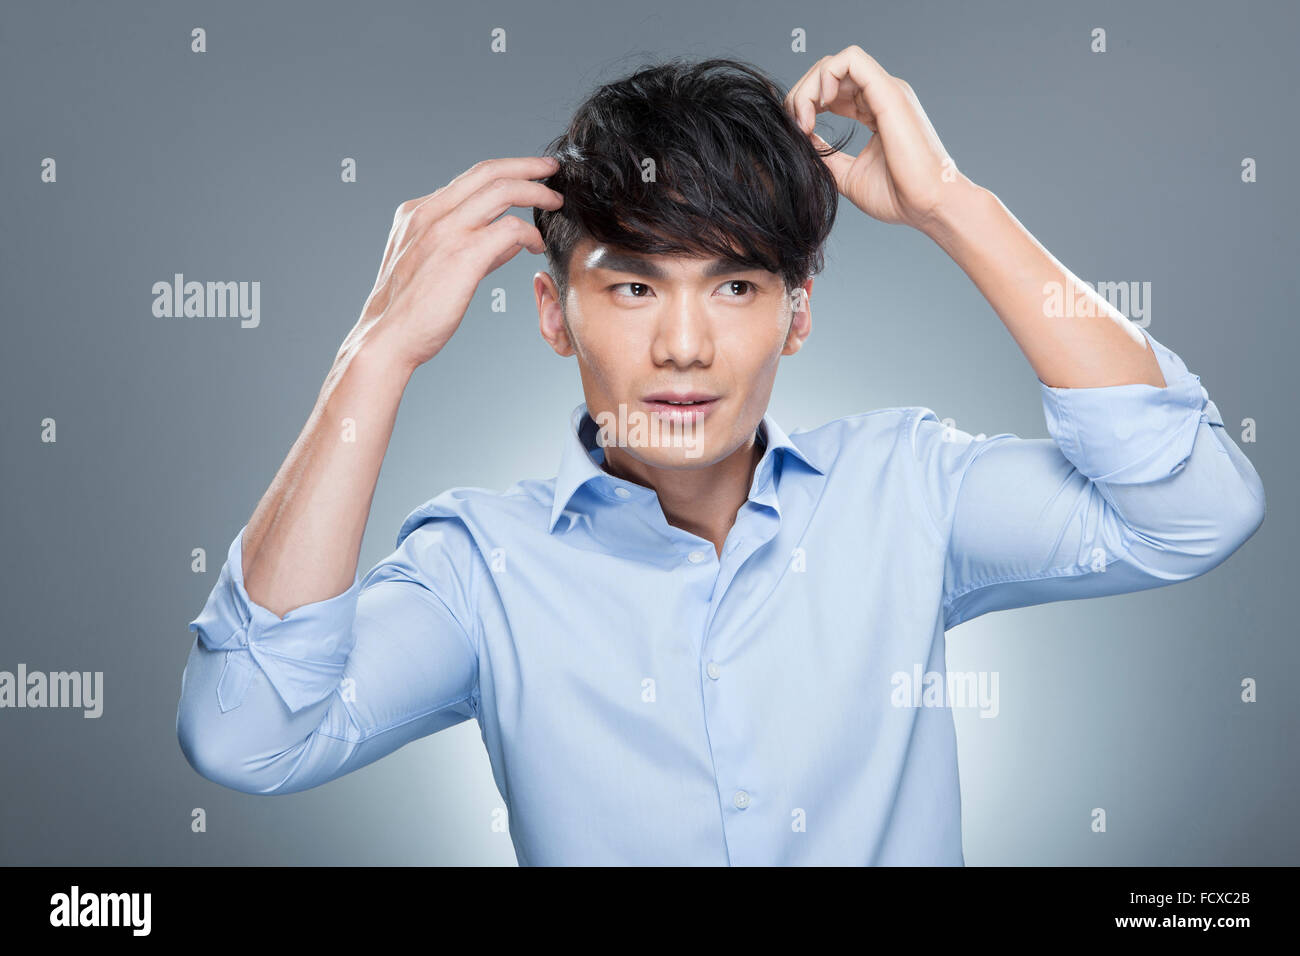 Man in blue shirt touching his hair and looking up Stock Photo